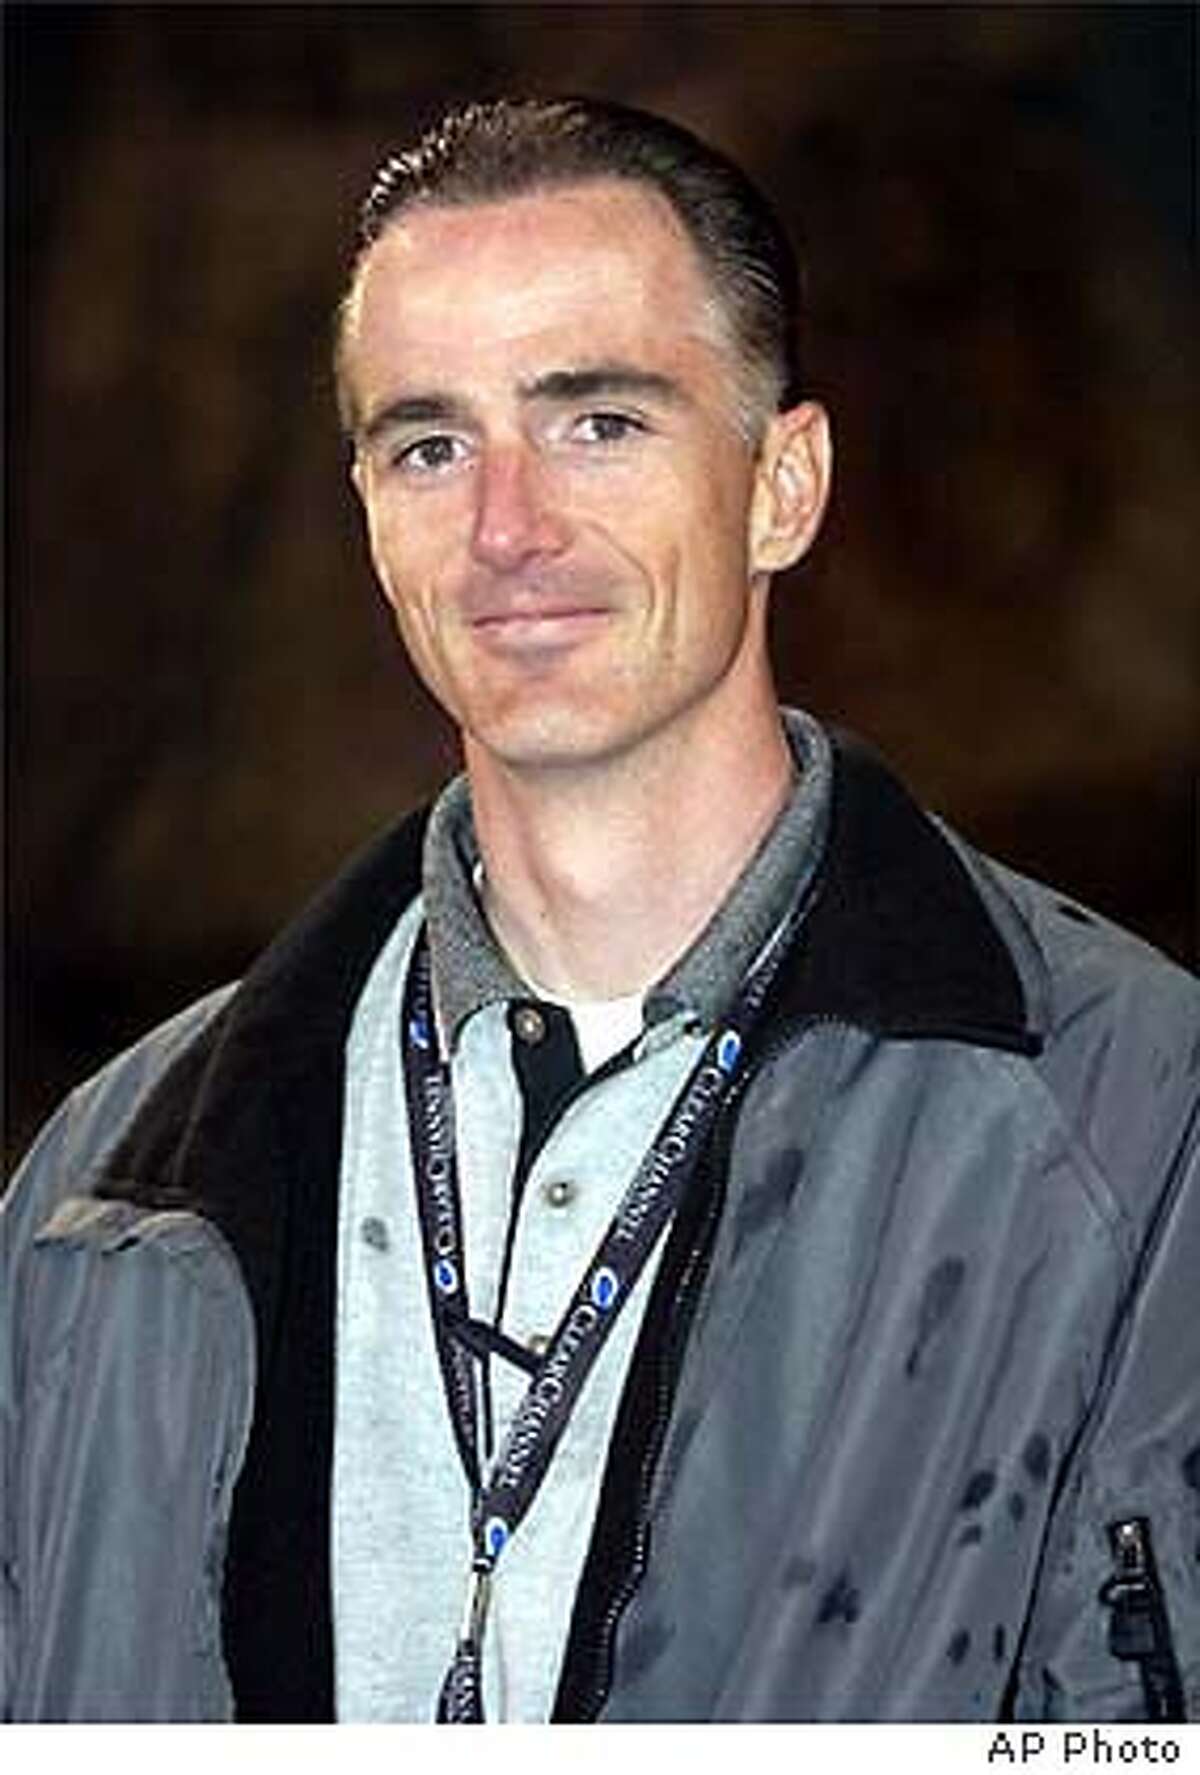 ** FILE ** Mark Jeffrey Reynolds, 35, of Foothill Ranch, Calif., is shown in an undated photo. Reynolds' body was found at the top of a trail in an Orange County, Calif., park near a bicycle on Thursday, Jan. 8, 2004, shortly after another unrelated bicyclist was attacked by a mountain lion. Authorities couldn't confirm if Reynolds was killed by the mountain lion, but animal involvement was suspected. An autopsy was planned Friday. (AP Photo/Orange County Register) Mark Reynolds